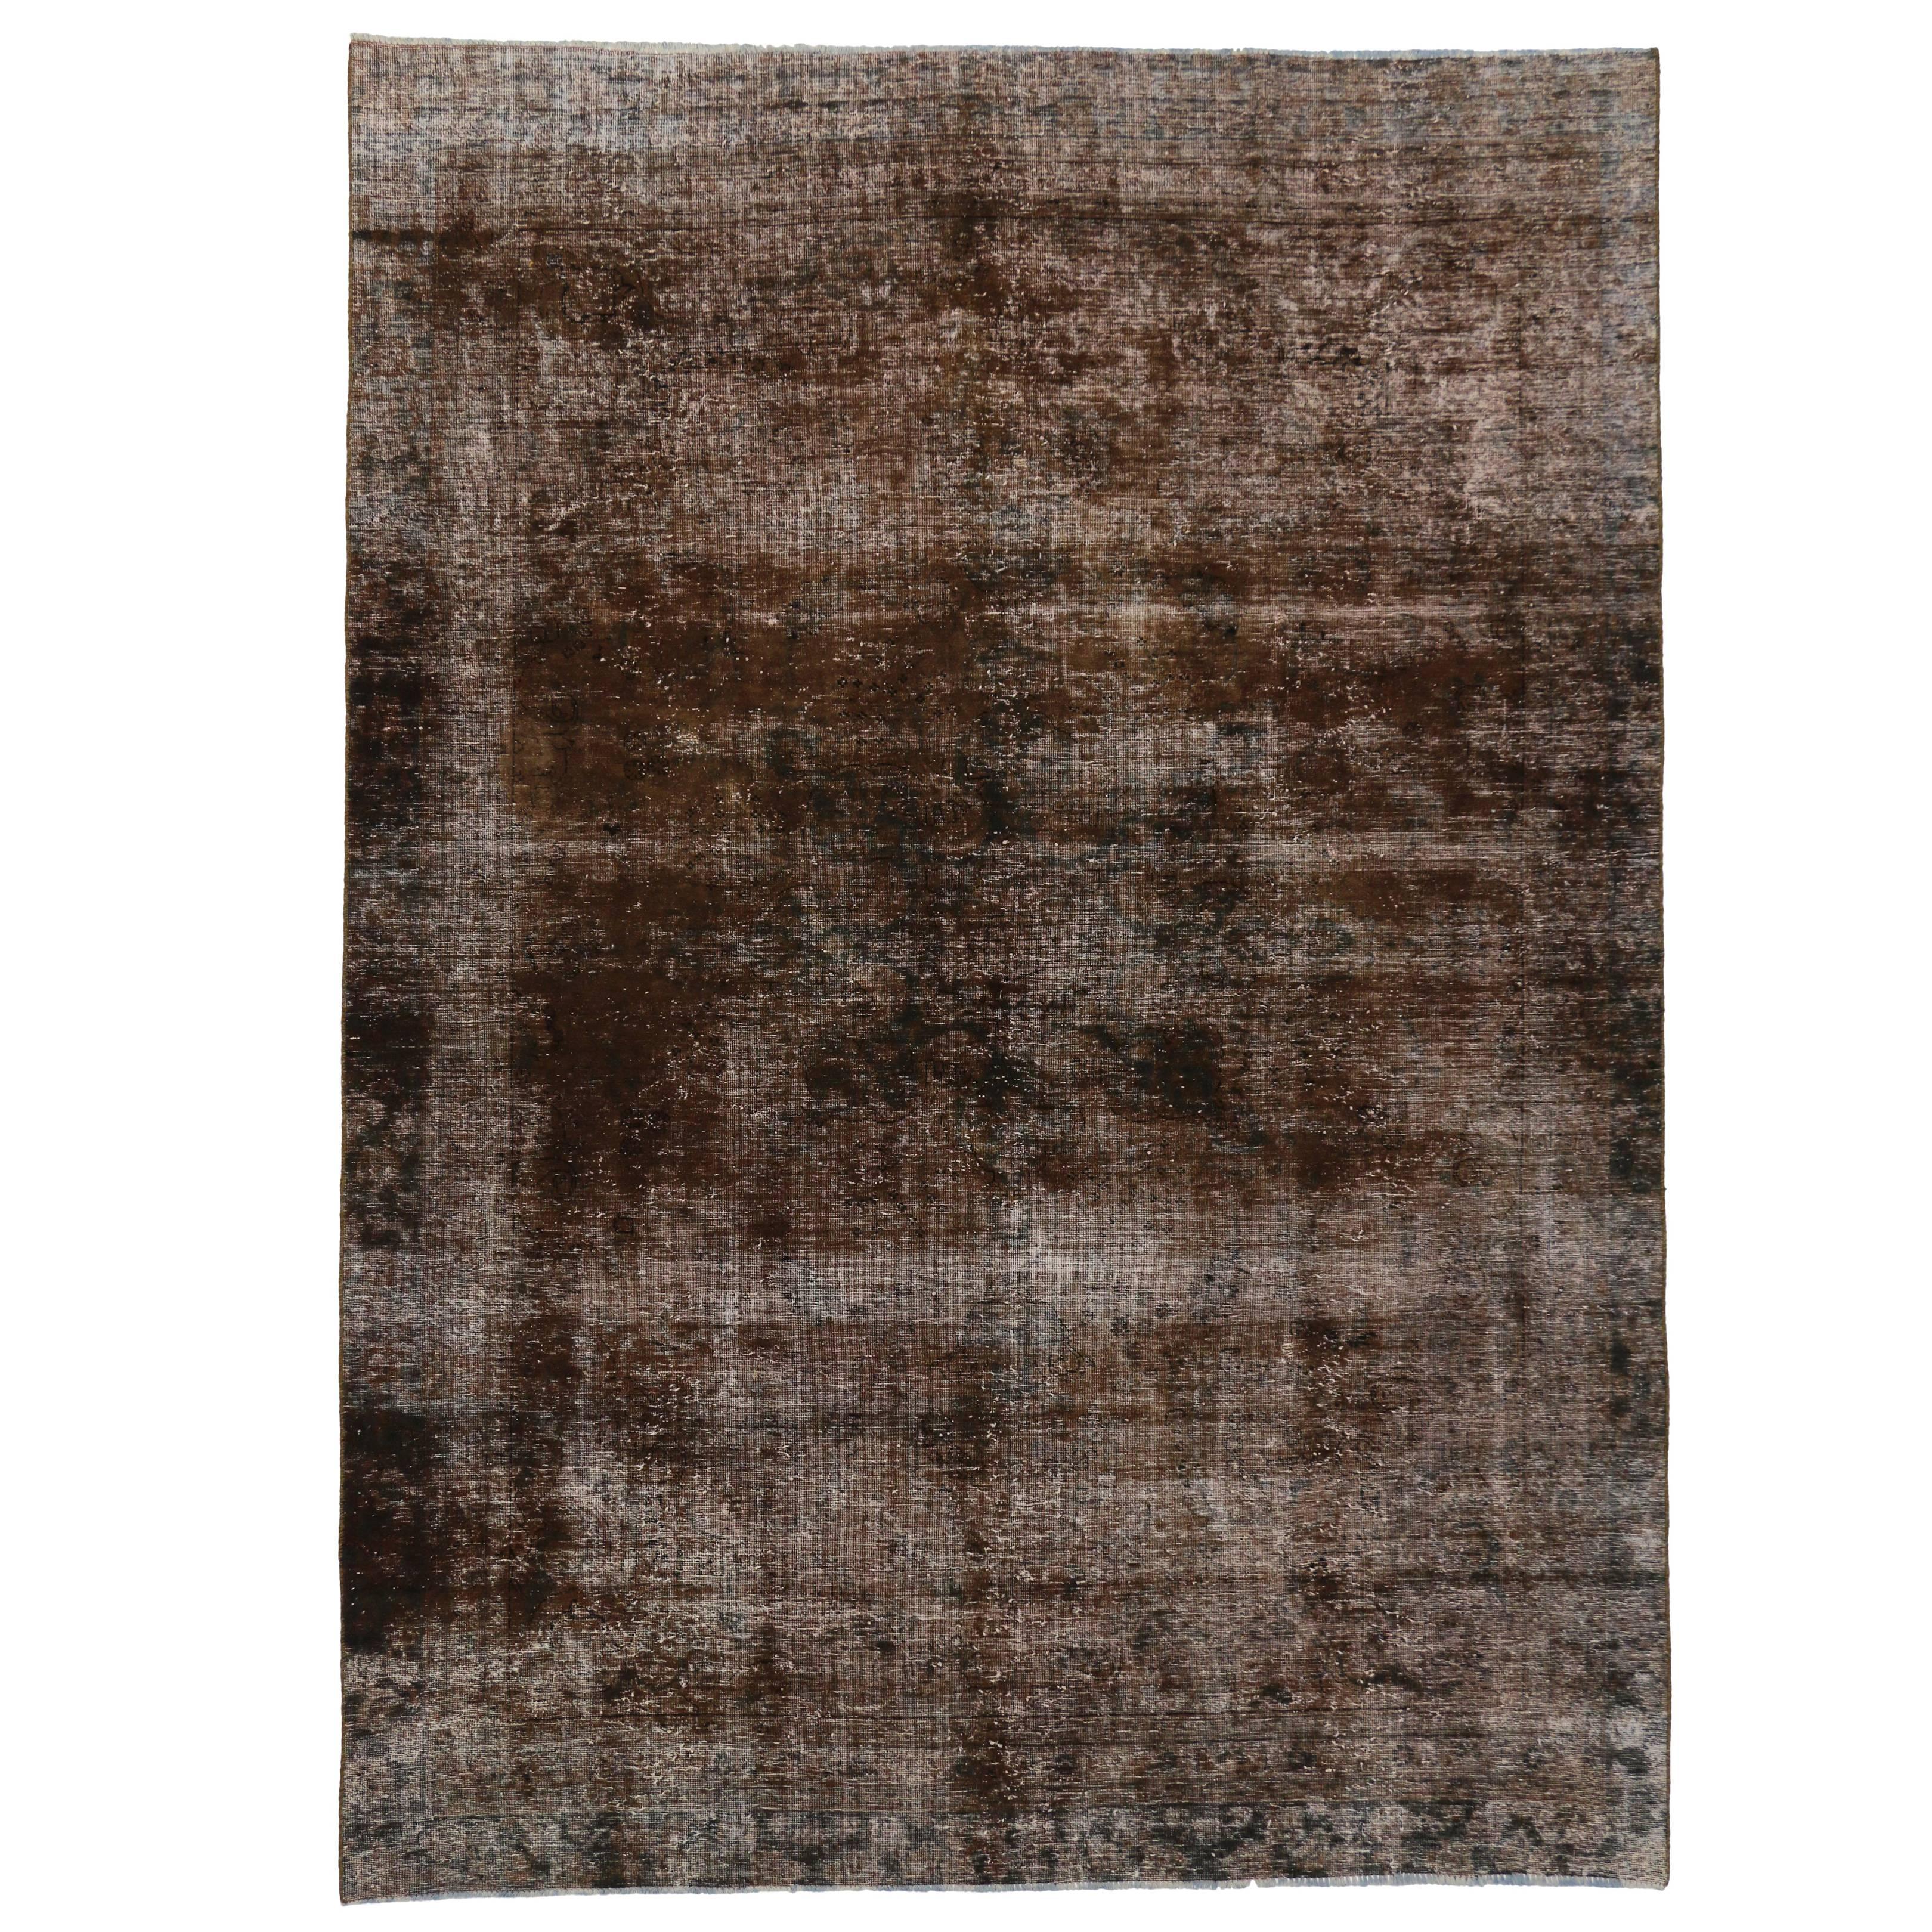 Distressed Antique Persian Overdyed Rug with Modern Rustic Industrial Style